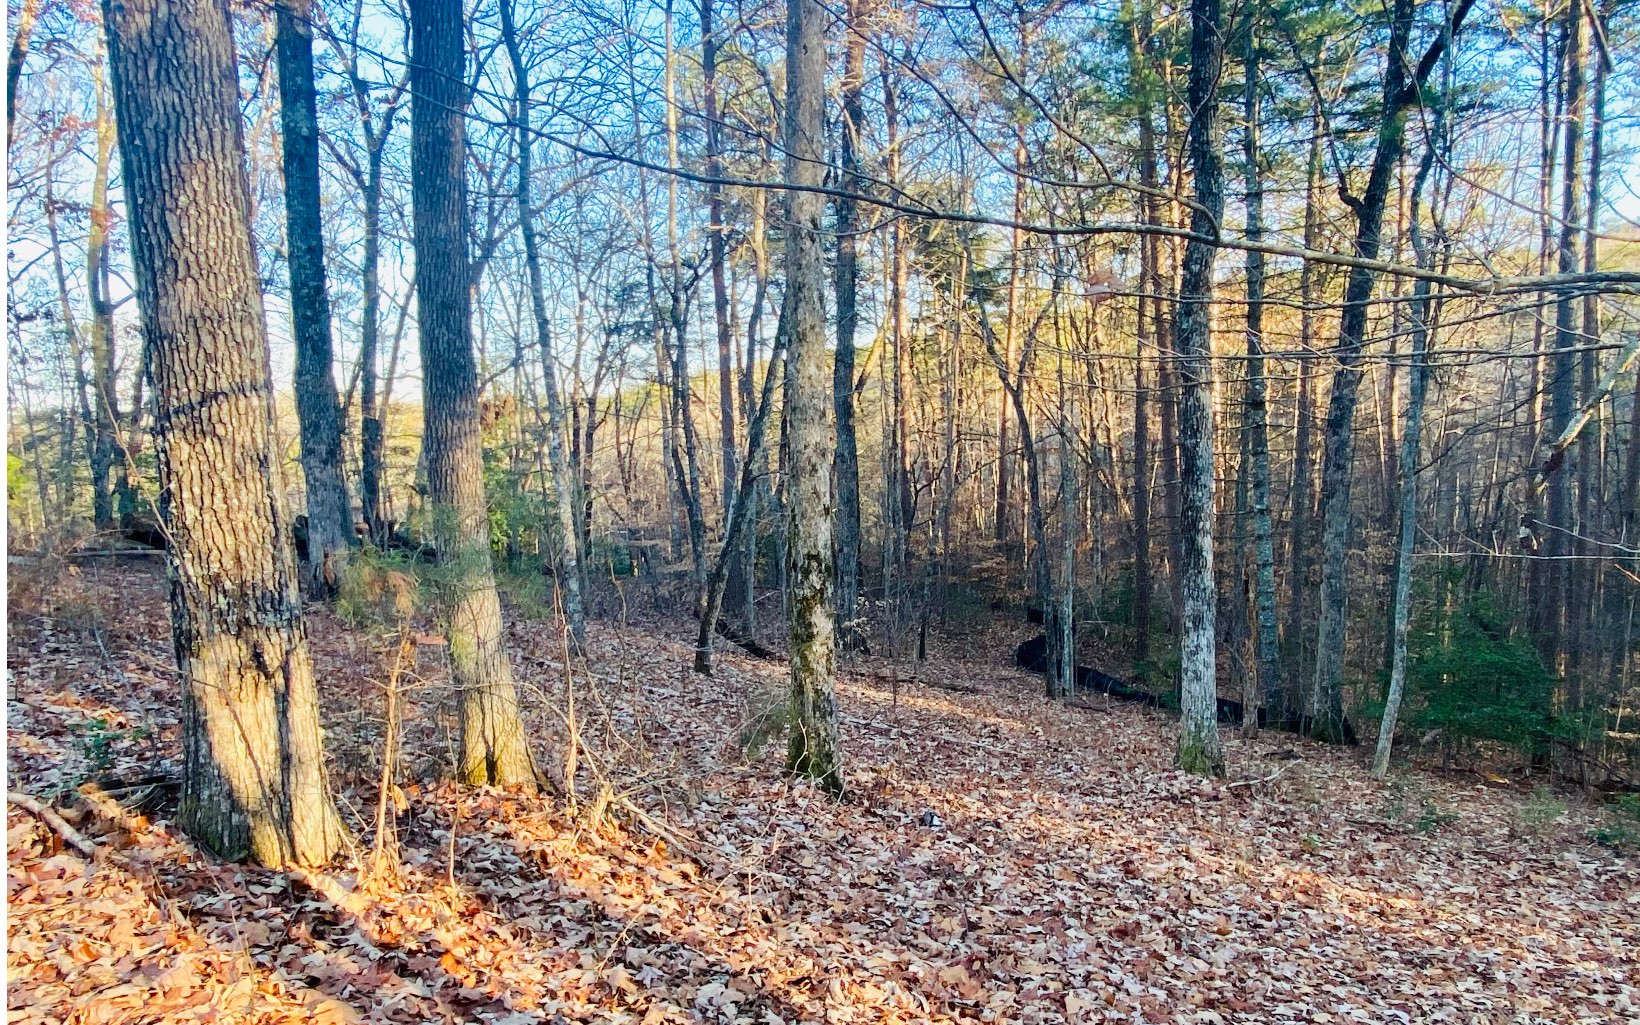 This 1.22 acre lot located in the desirable Ivy Ridge Estates Community is the Perfect Location to build your Dream Home or Mountain Retreat. It is conveniently tucked away between historic downtown Blue Ridge & McCaysville. This lot offers a seasonal Mountain View with a gentle sloping terrain & small stream that flows the length of the lot. It is located within a Cul de sac for additional privacy and may be accessed with ease from the front or side of the property. All within minutes to the Hospital, Medical facilities, Schools & so much more. This is a gorgeous community with newly constructed homes and reasonable HOA fees. If your Dream is to Build your own custom Mountain Retreat, then Let Your Dreams begin here in Ivy Ridge Estates!